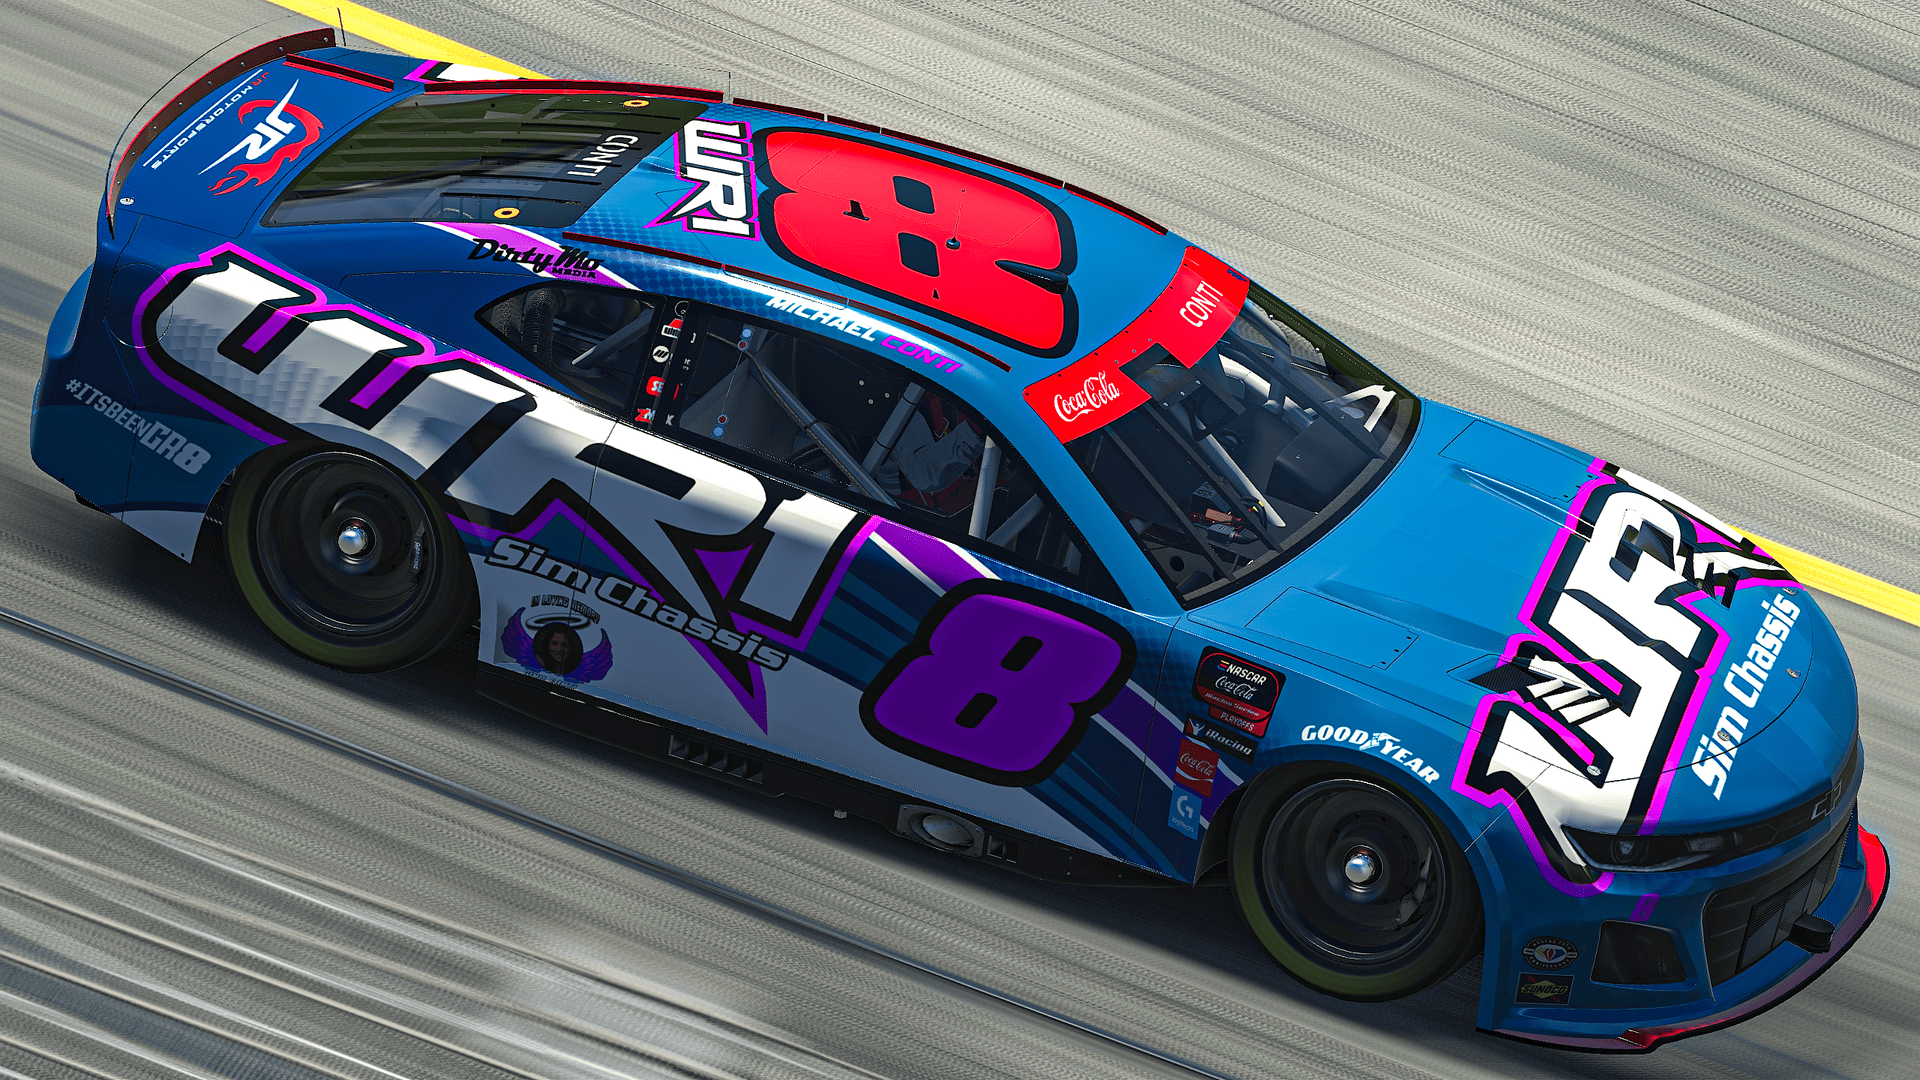 Michael Conti honored his mom with a 'Gina Strong' paint scheme in his final eNASCAR Coca-Cola iRacing Series season.